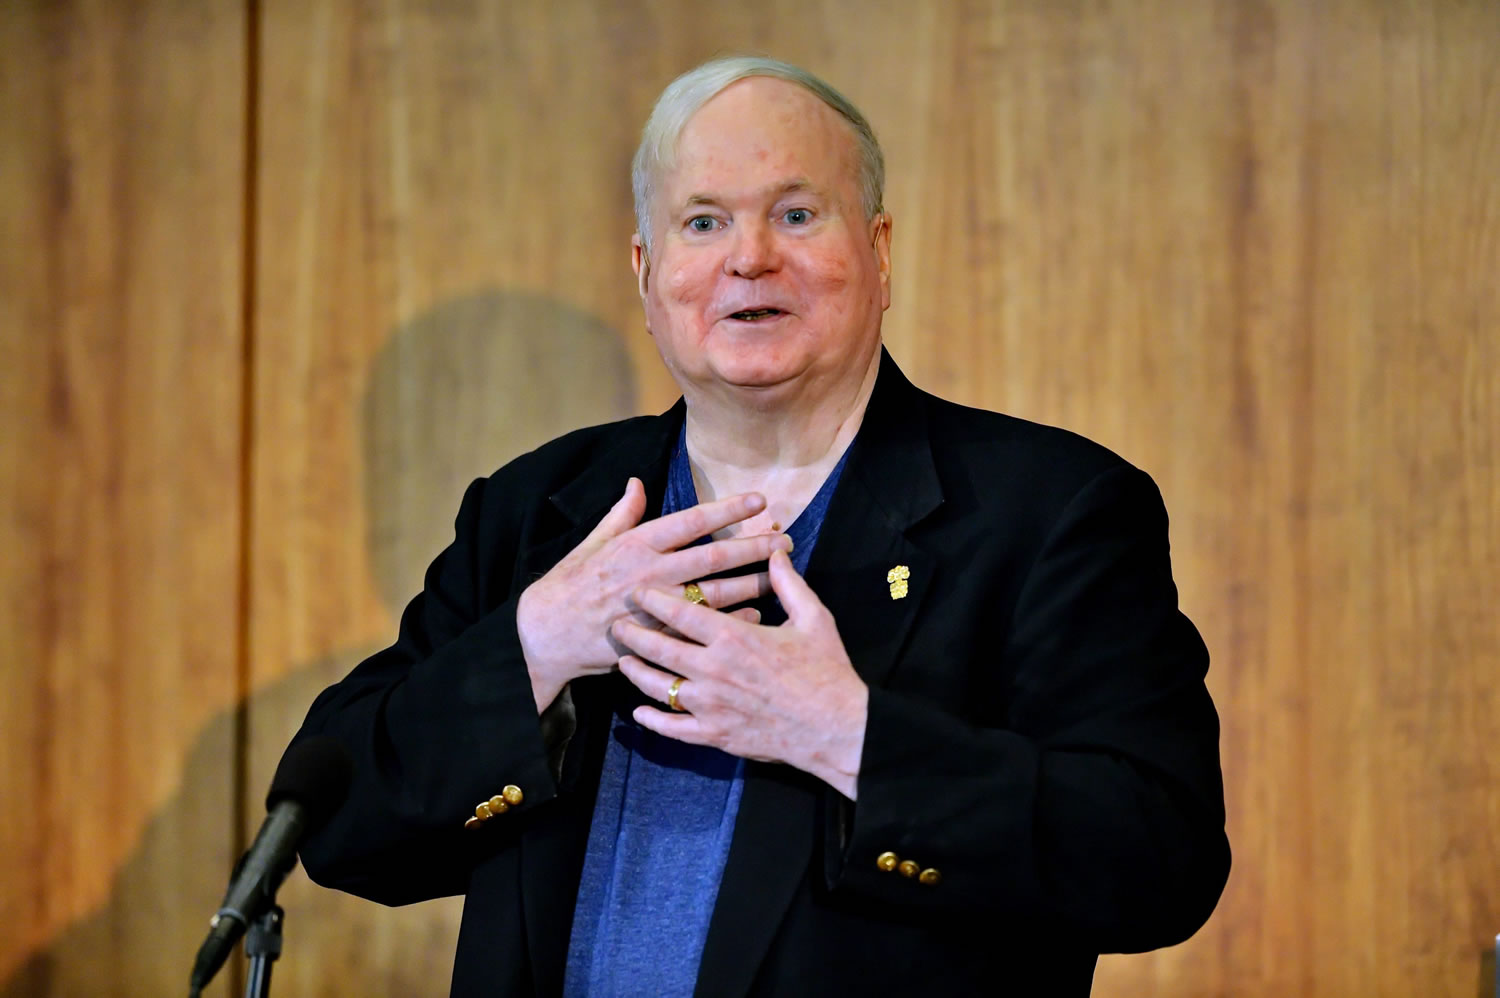 Author Pat Conroy speaks to a crowd May 16, 2014, during a ceremony at the Hollings Library in Columbia, S.C. Conroy, whose best-selling novels drew from his own sometimes painful experiences and evoked vistas of the South Carolina coast and its people, has died at age 70. Todd Doughty, executive director of publicity at publisher Doubleday, says Conroy died Friday evening at his home in Beaufort surrounded by family and loved ones.